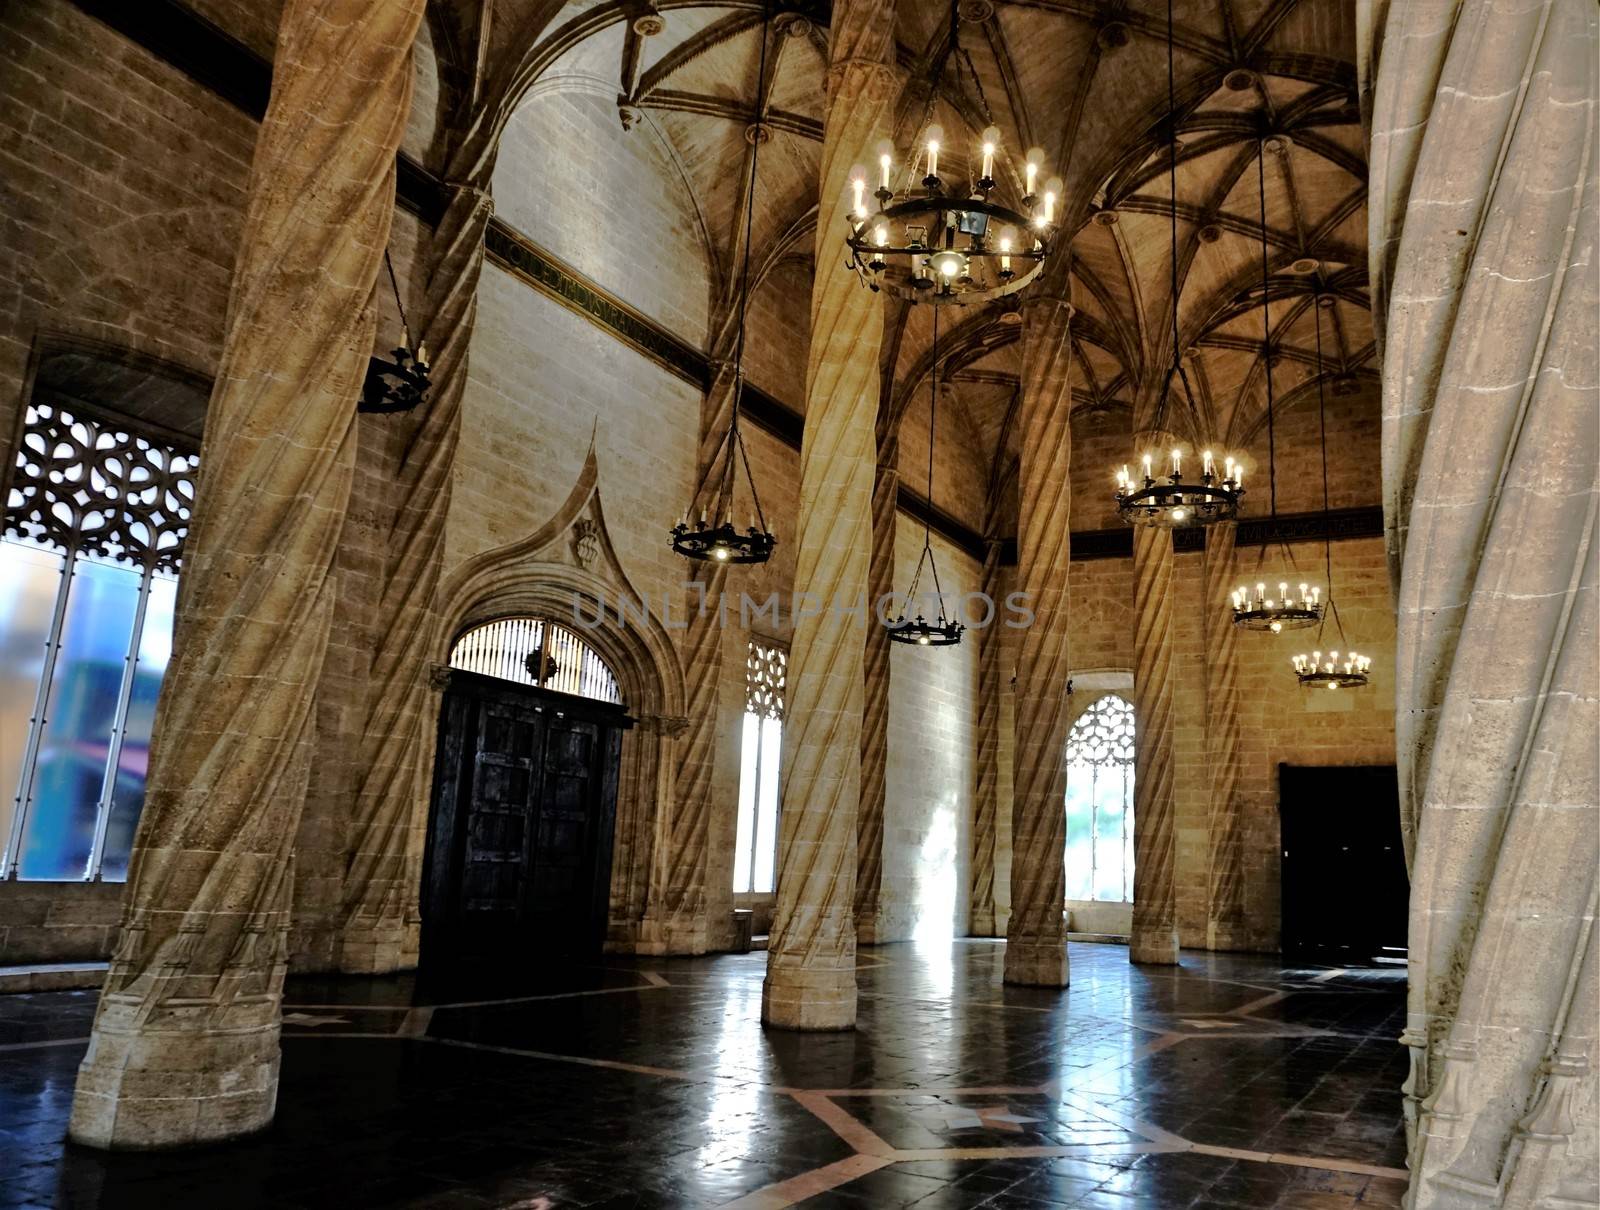 Photo of Valencia silk excahnge interior hall in Spain